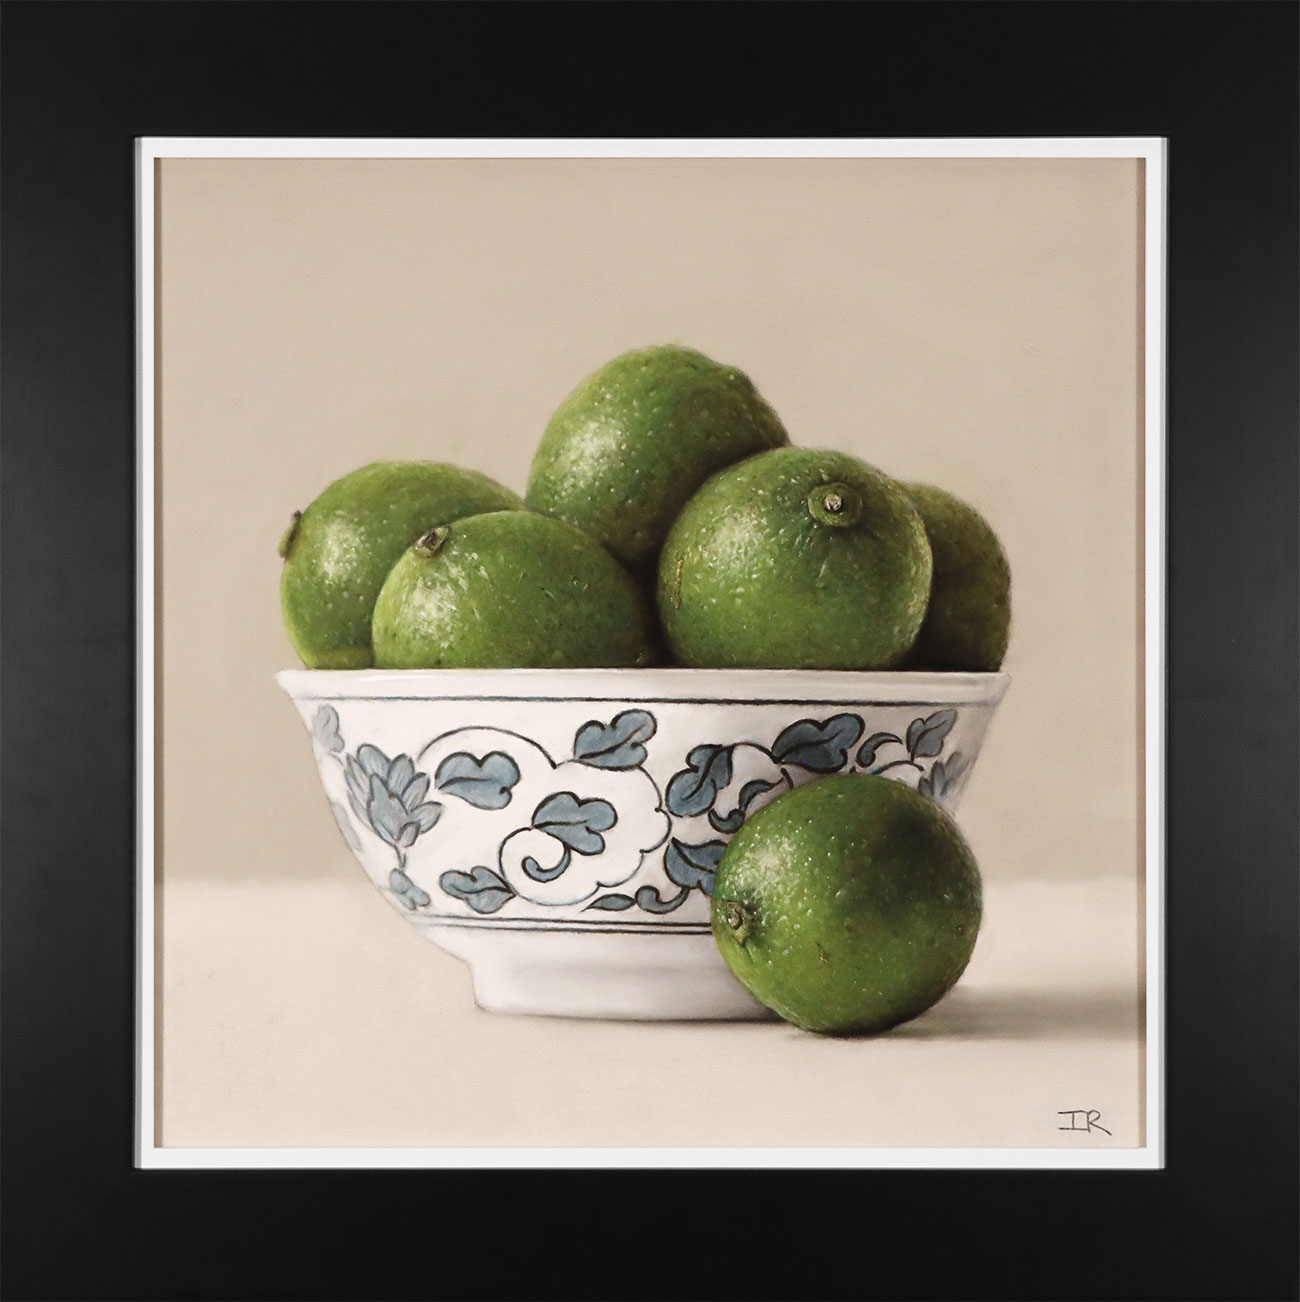 Ian Rawling, Pastel, Bowl of Limes Click to enlarge